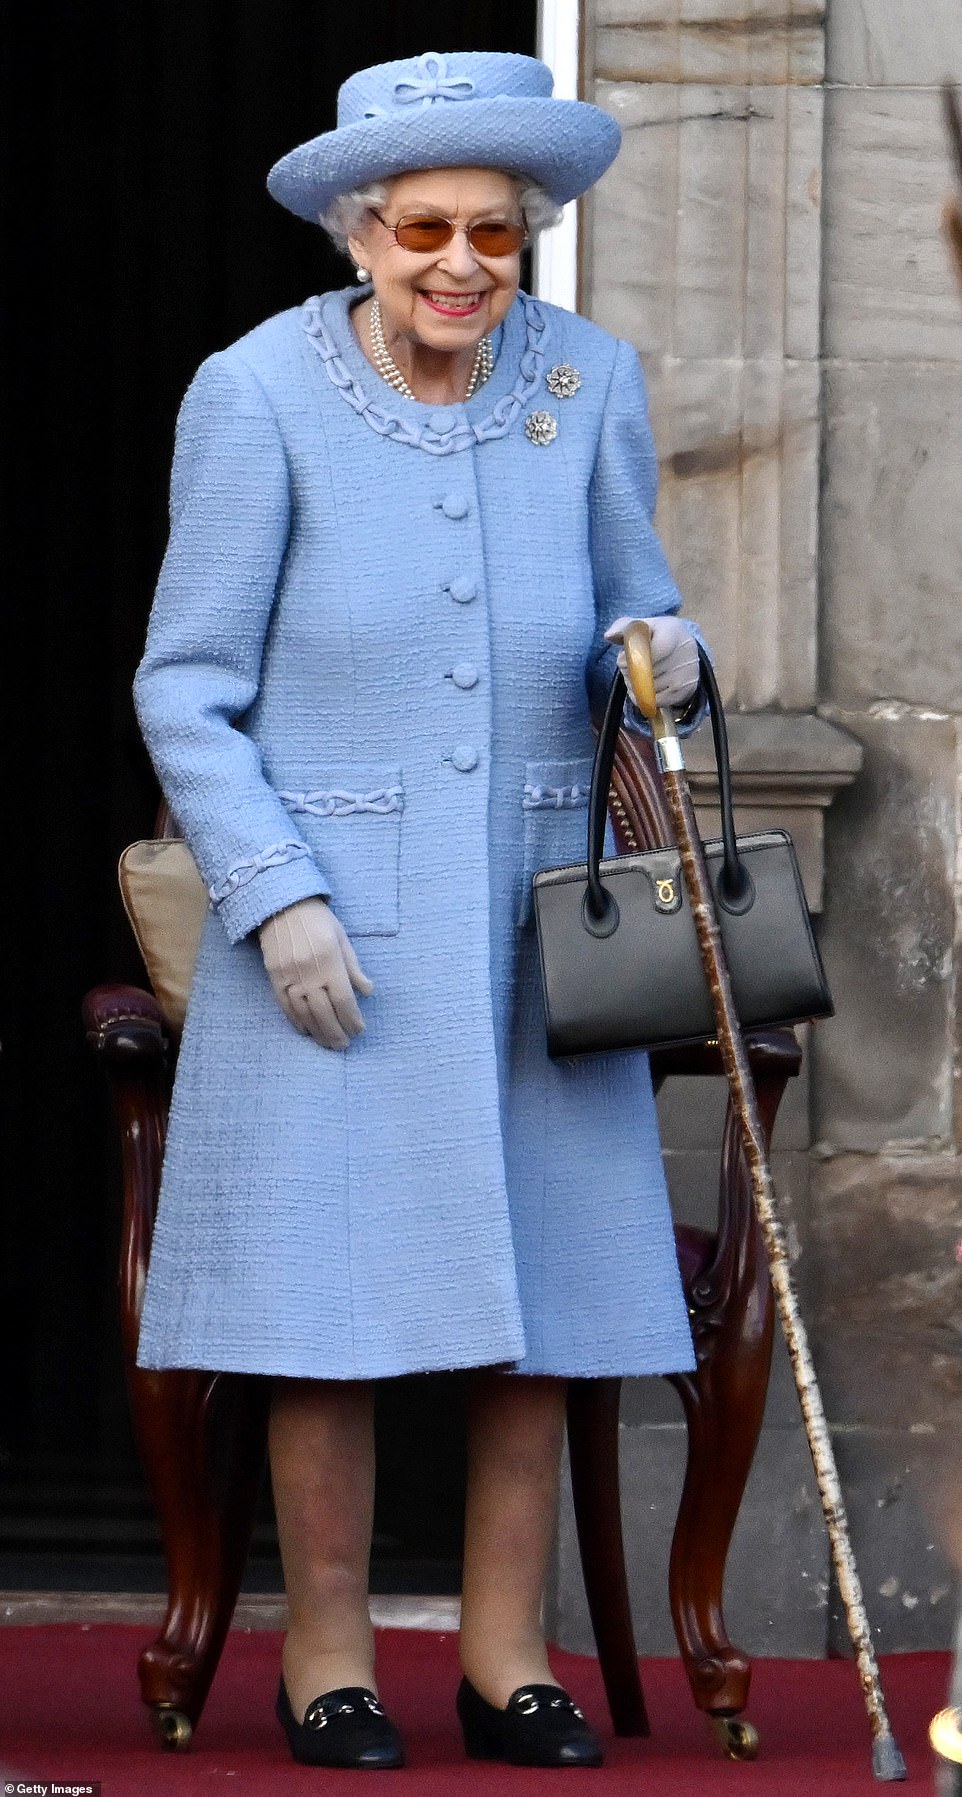 Radiant blue!  The Queen smiles as she takes part in the Royal Company of Archers' Reddendo parade in the gardens of the Palace of Holyroodhouse